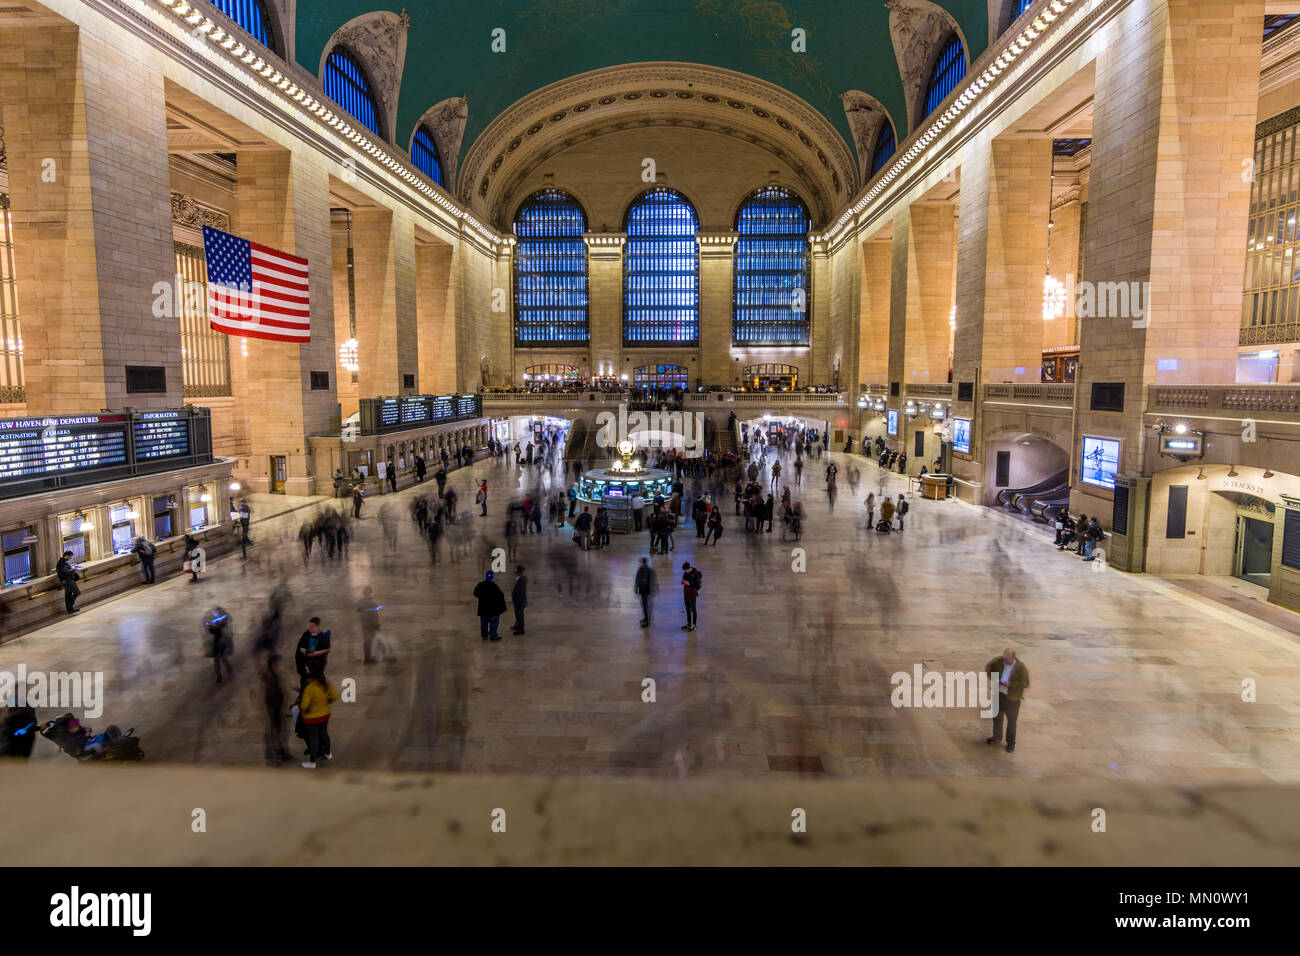 New York, US - March 28, 2018: Commuters and tourists during rush hour at the iconic Central Station in New York Stock Photo